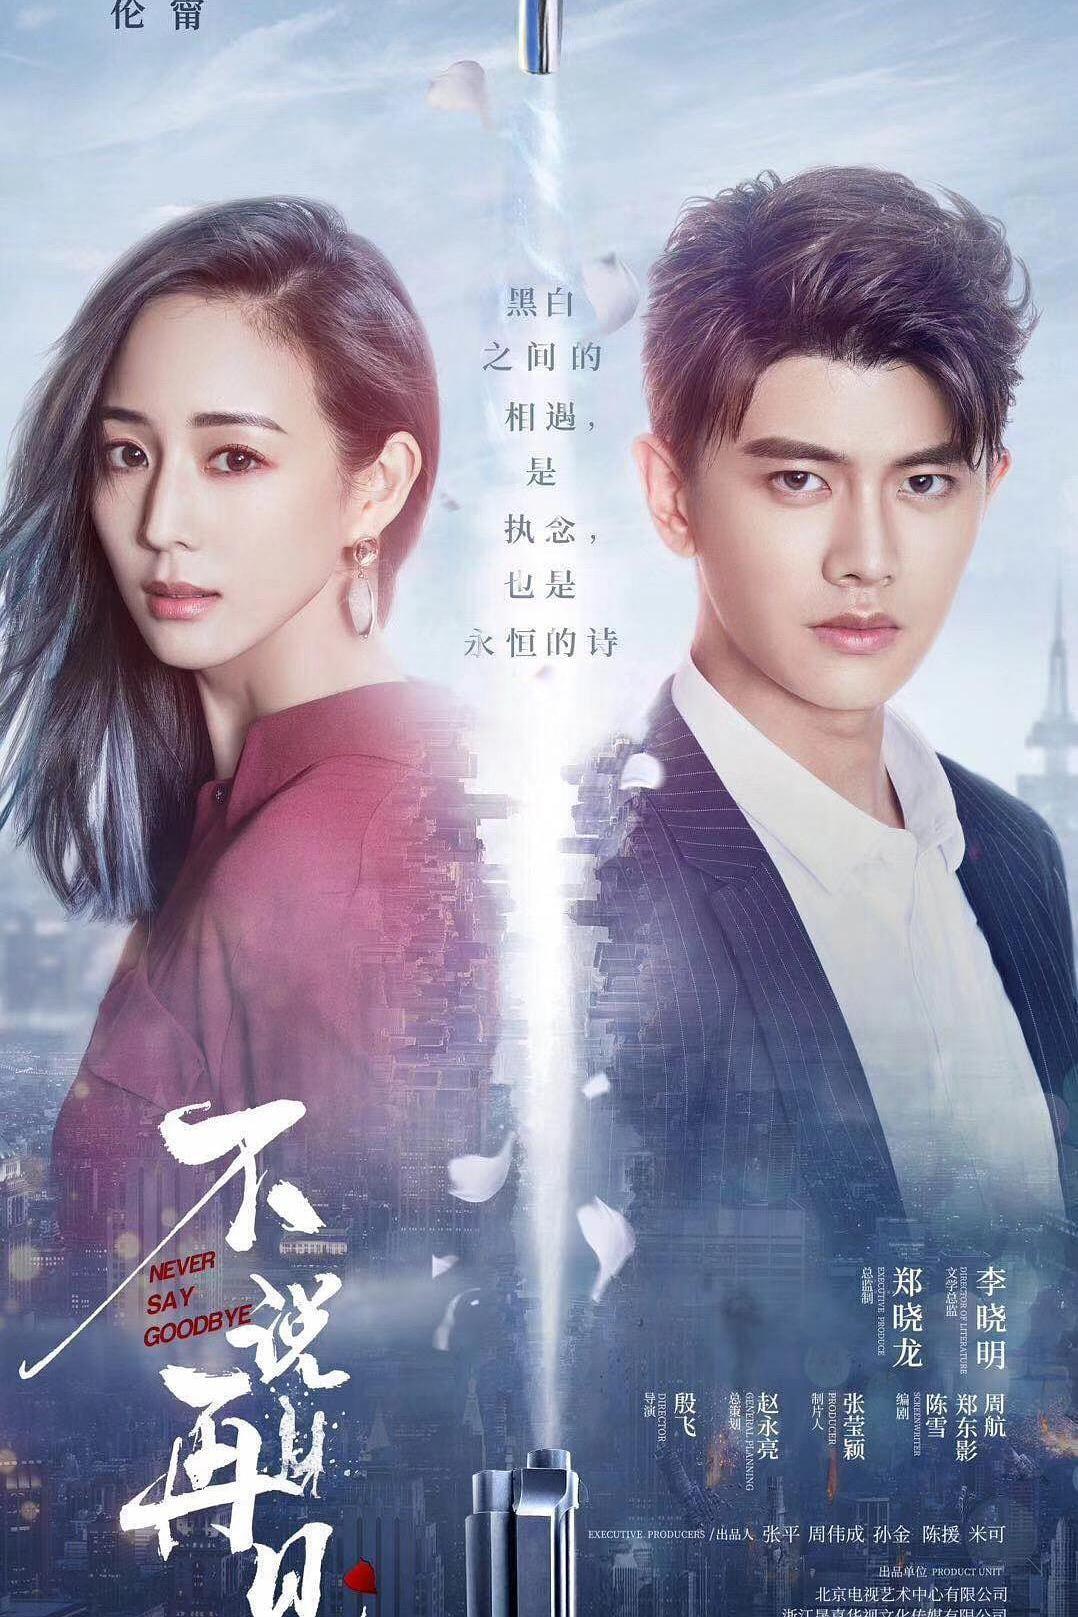 TV ratings for Never Say Goodbye (不说再见) in New Zealand. iqiyi TV series